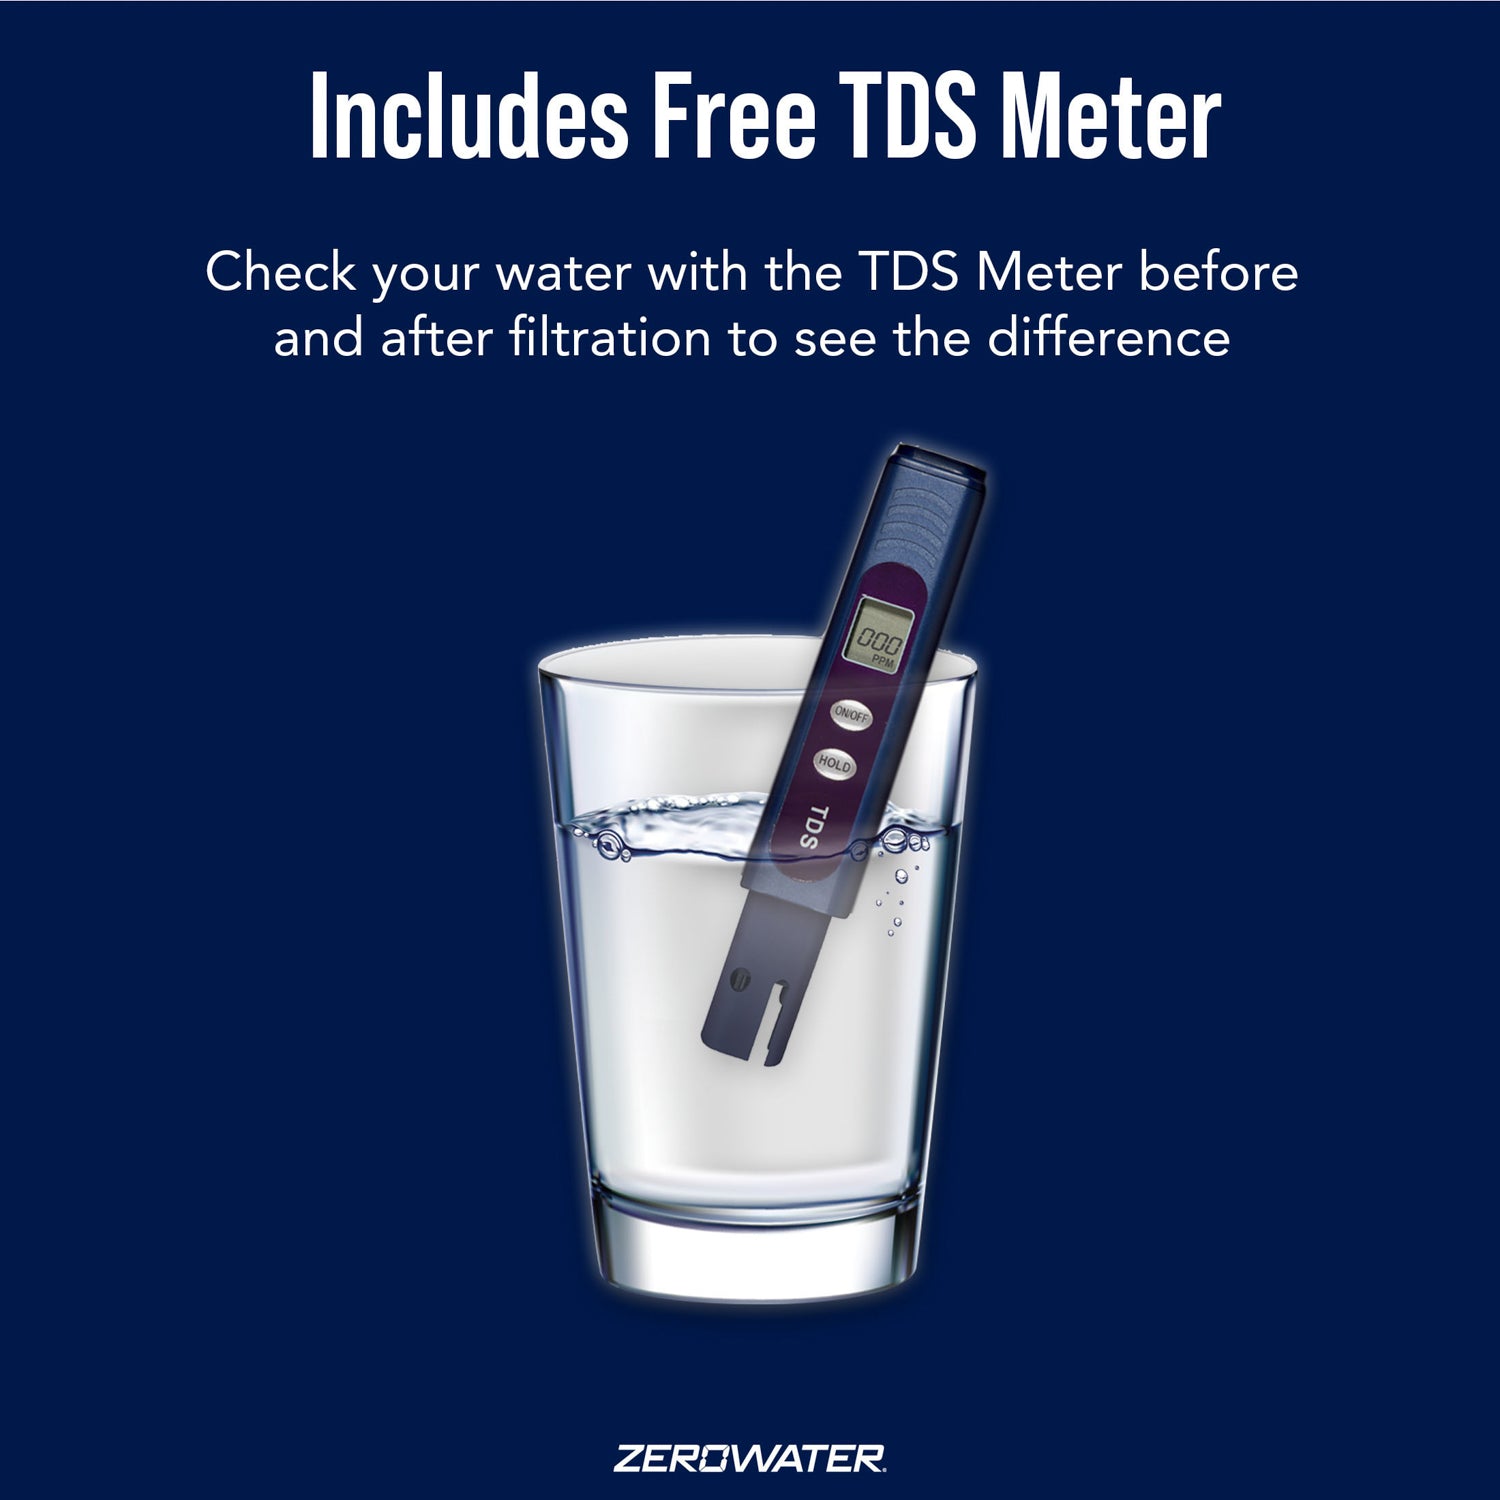 ZeroWater 22-Cup Ready-Read 5-Stage Water Filter Dispenser with Instant  Read Out - 0 TDS IAPMO Certified to Reduce Lead, Chromium, and PFOA/PFOS